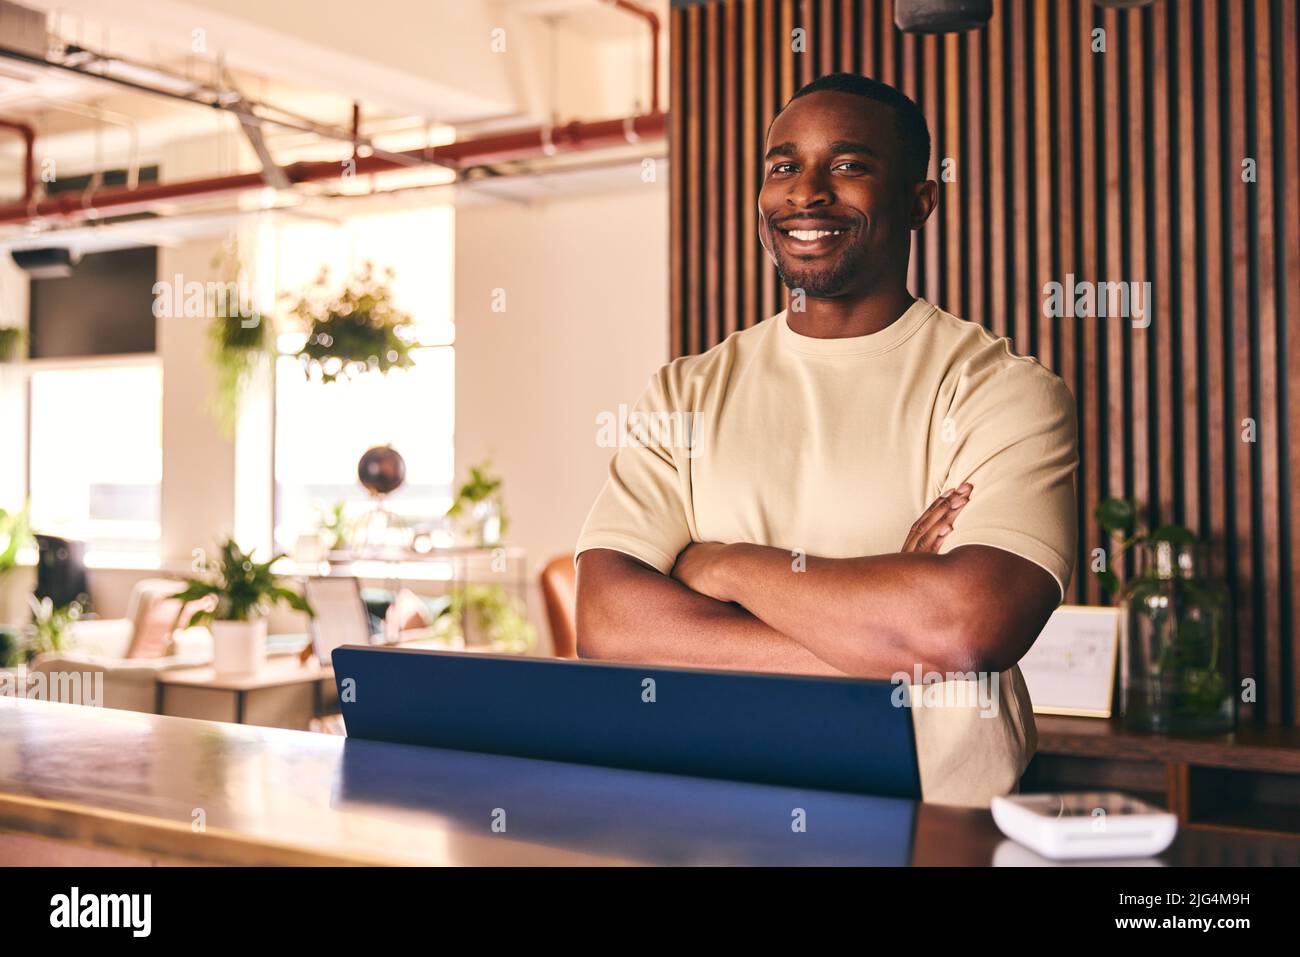 Portrait Of Small Business Owner In Shop Standing Behind Sales Desk Of Furniture Store Stock Photo